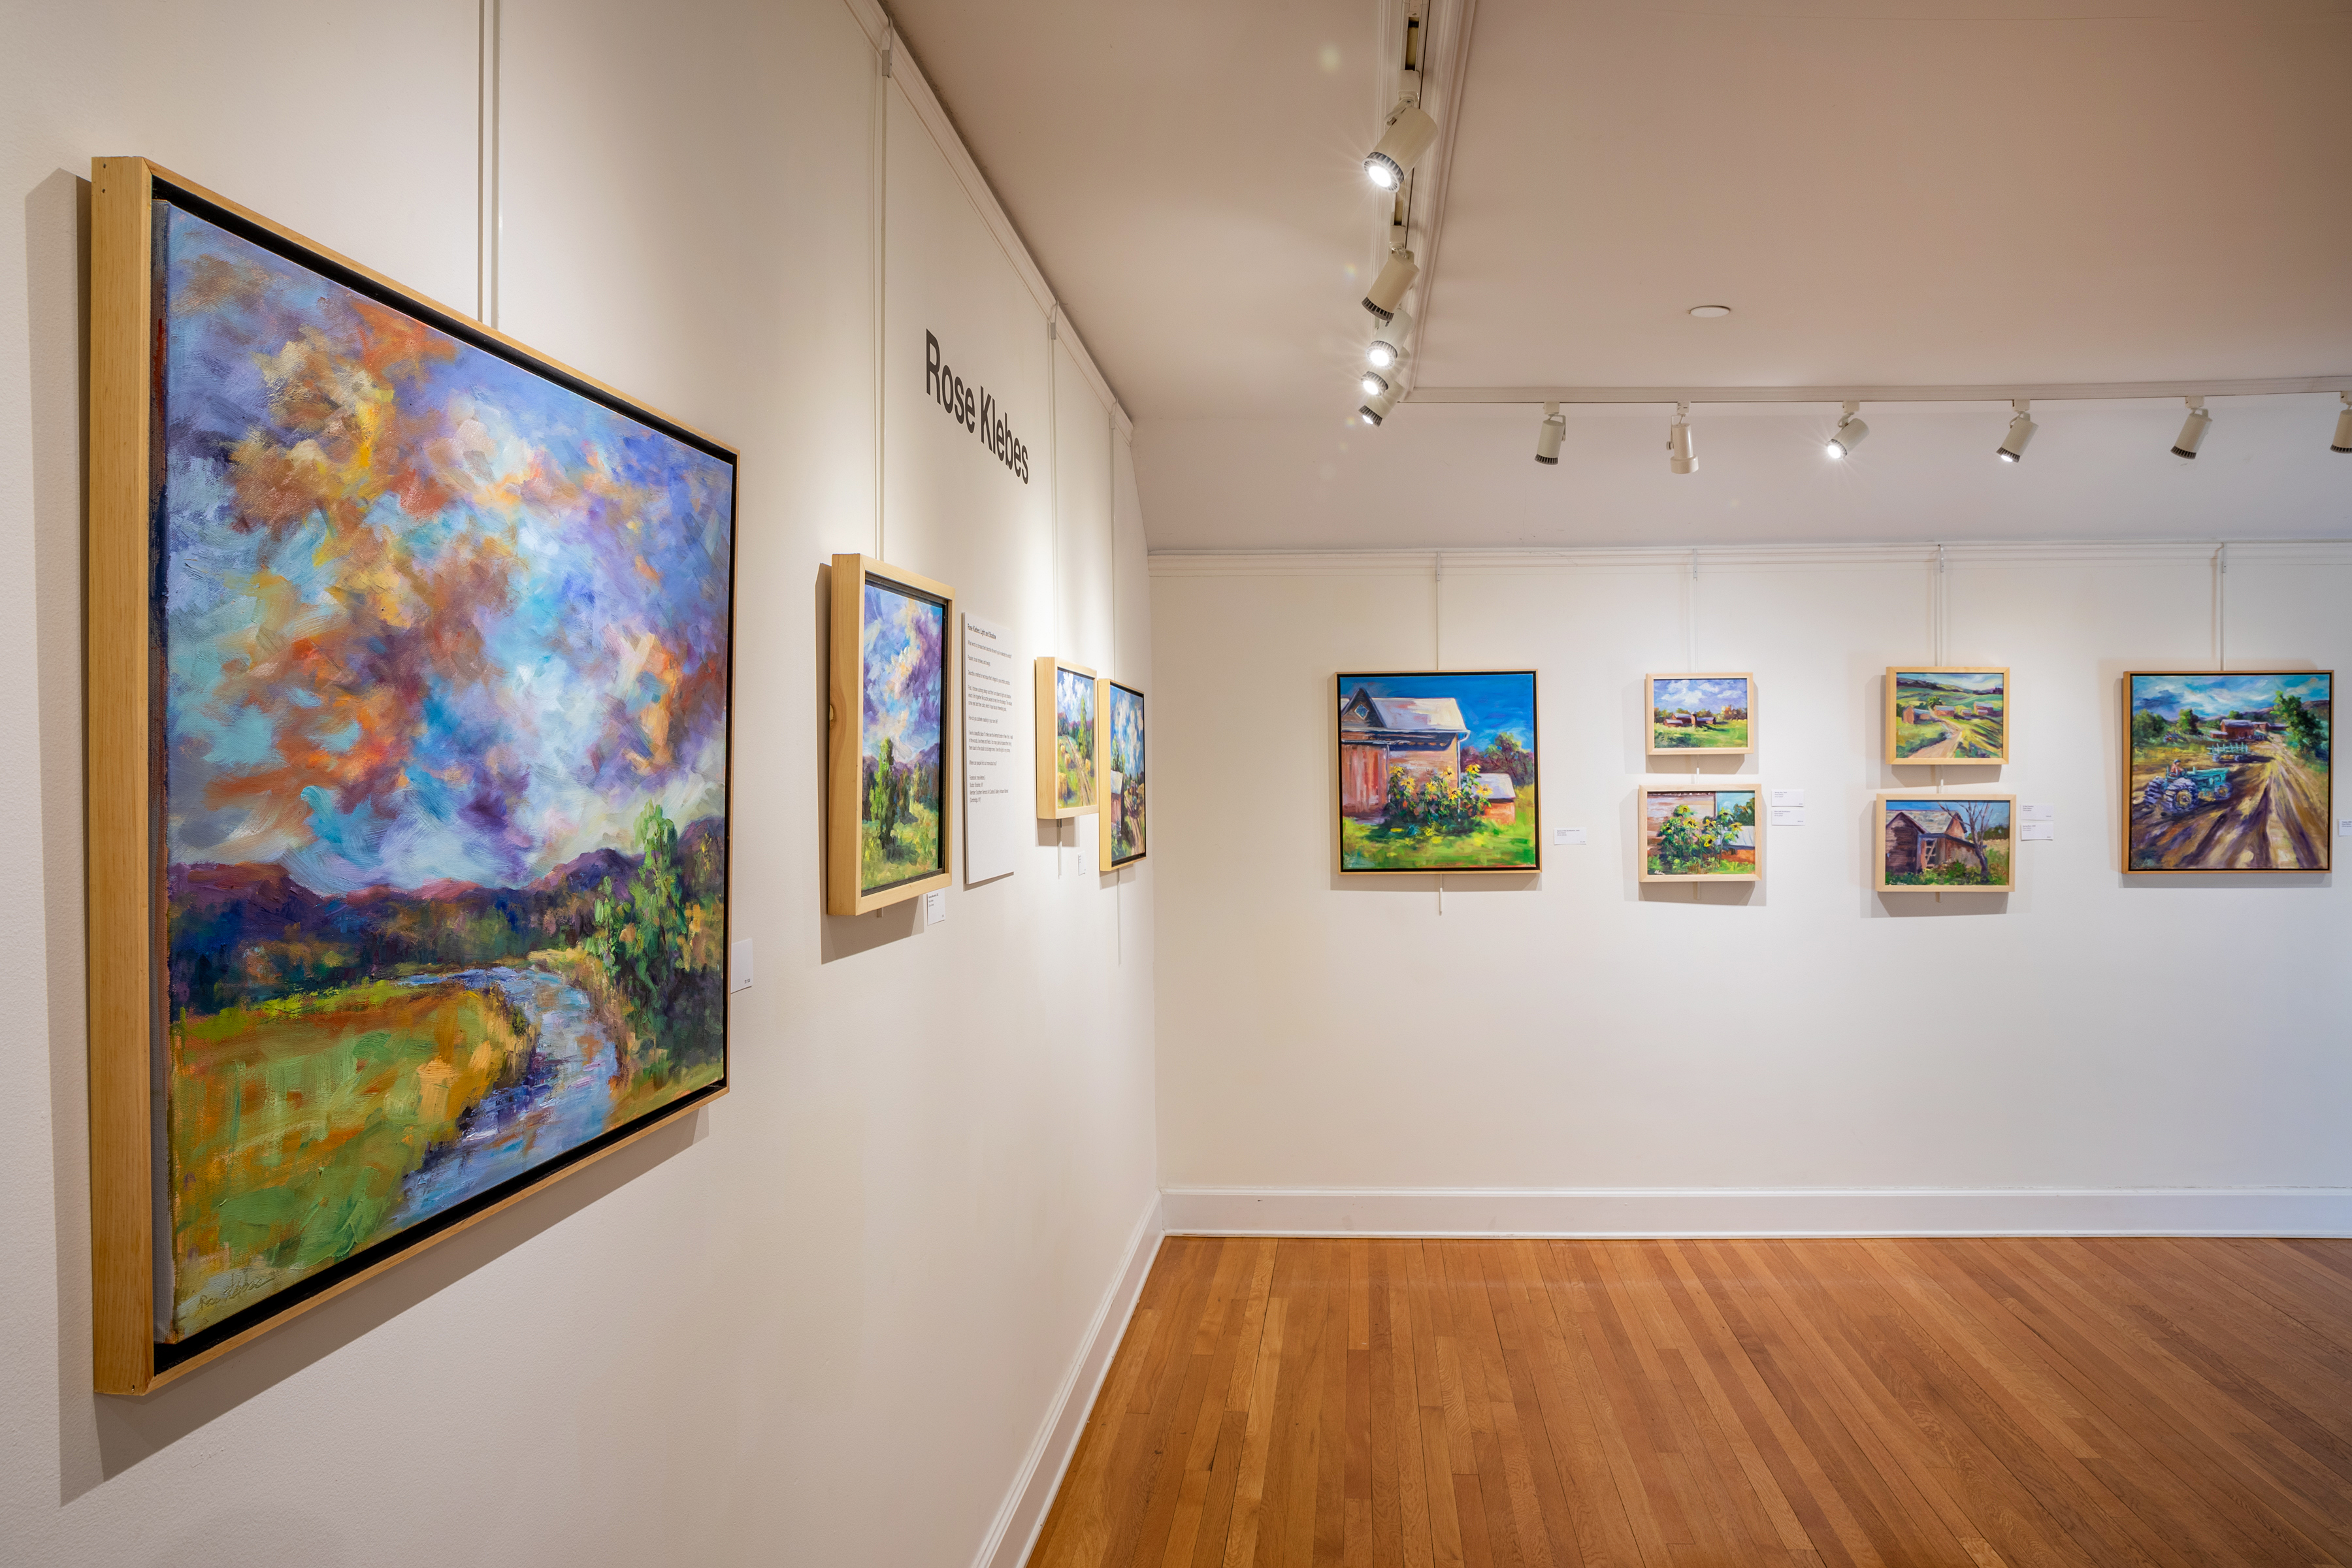 Gallery paintings at Southern Vermont Arts Center.